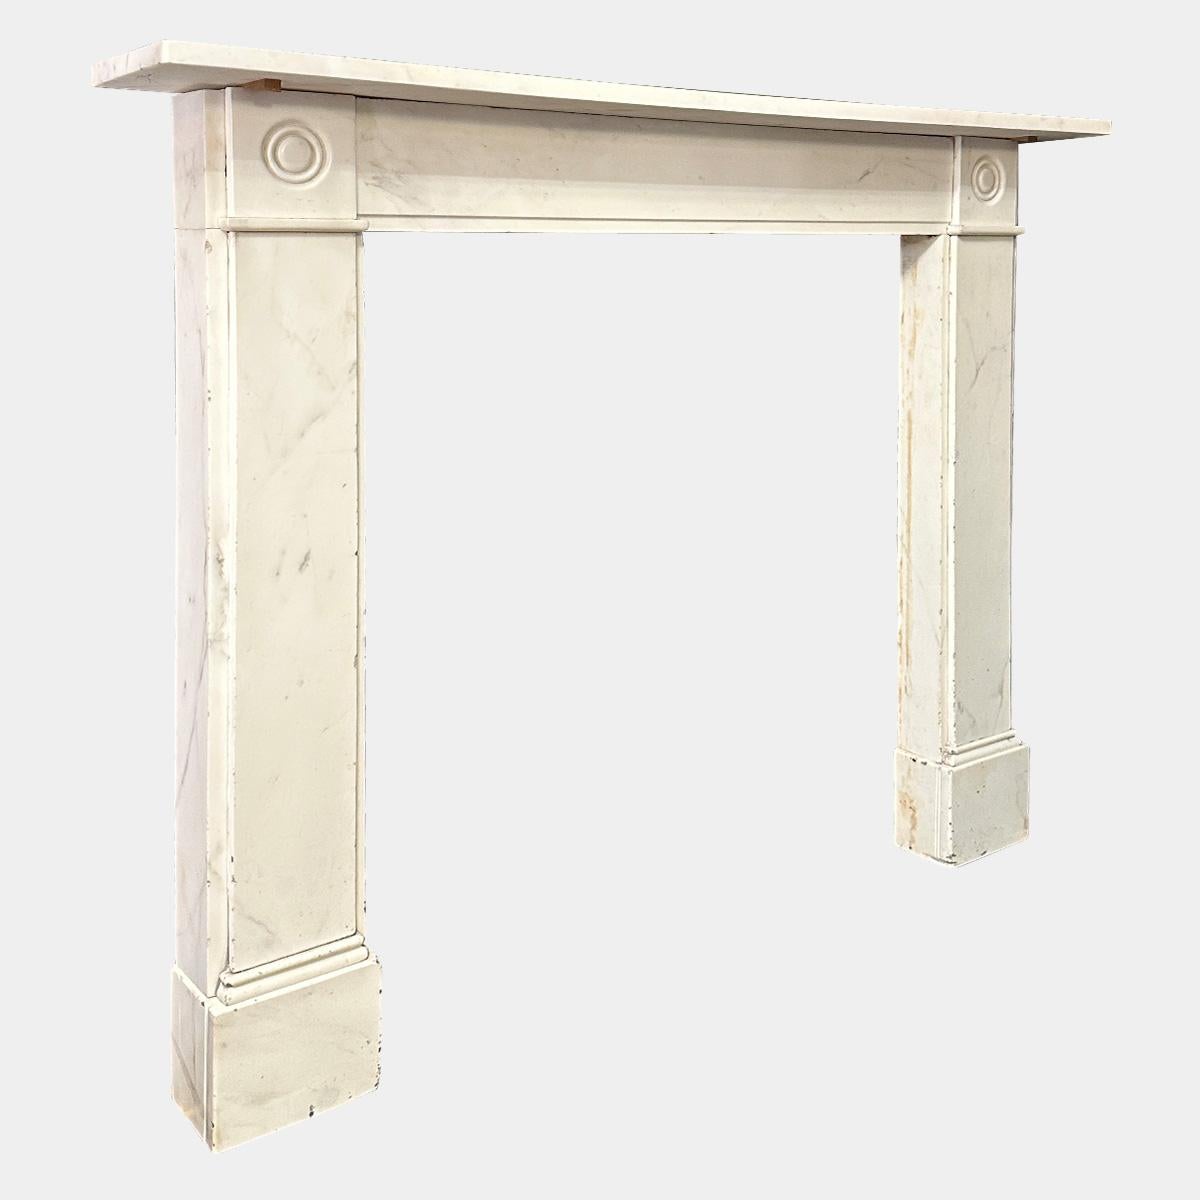 A very late 18th or turn of the 19th century English fireplace In Italian Statuary white marble. The plain pilaster jambs stood on separate foot blocks, surmounted by carved roundel corner blocks. A simple stepped frieze between matching the width